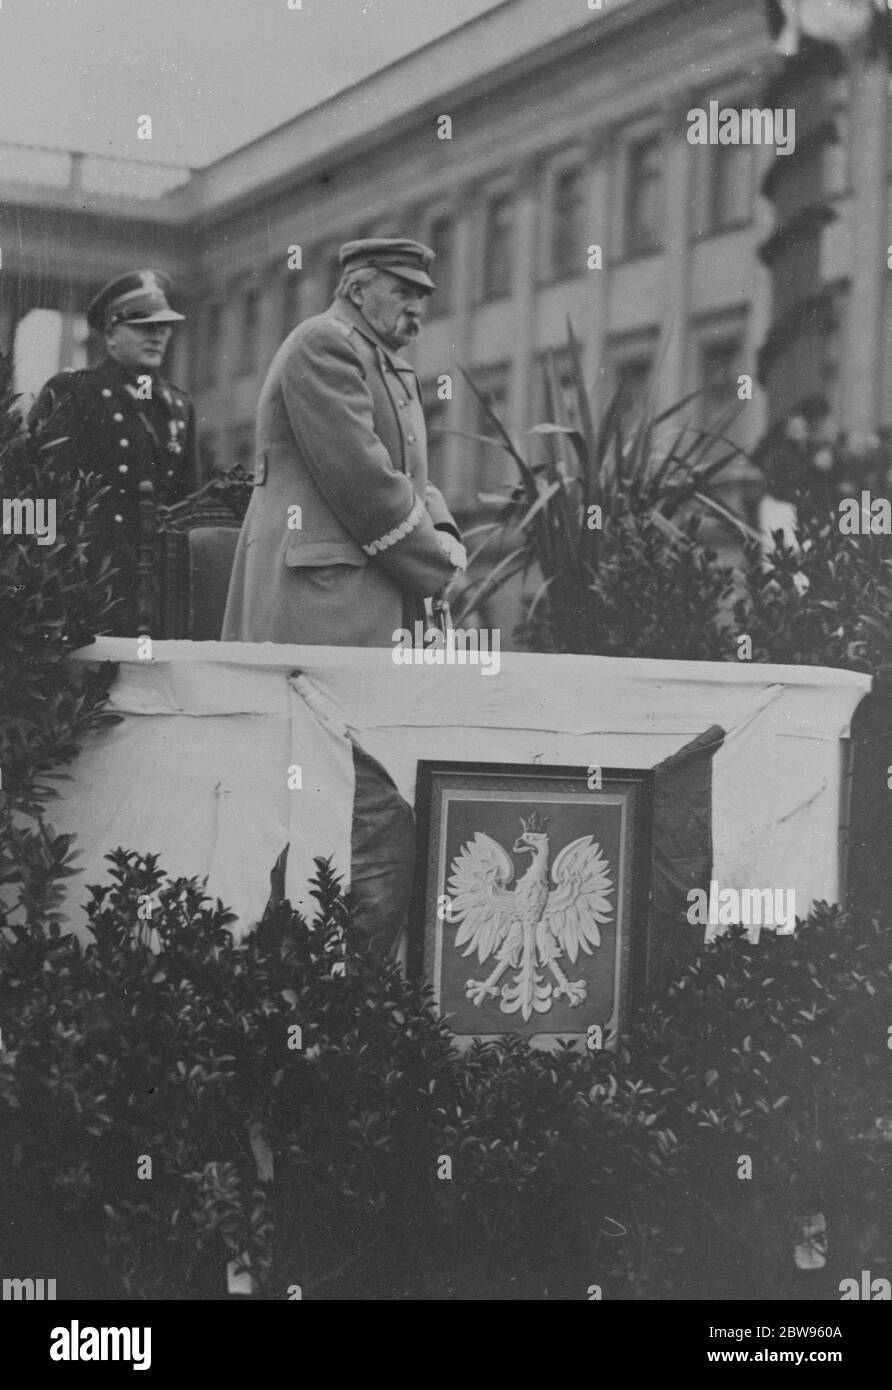 Marshal Pilsudski inaugurates monument to Polish airmen in Warsaw . Marshal Pilsudski , the Polish dictator inaugurated a monument to Polish aviators who were killed in the Great War , at Warsaw . Marshal Pilsudski at the inauguration ceremony in Warsaw . 15 November 1932 Stock Photo